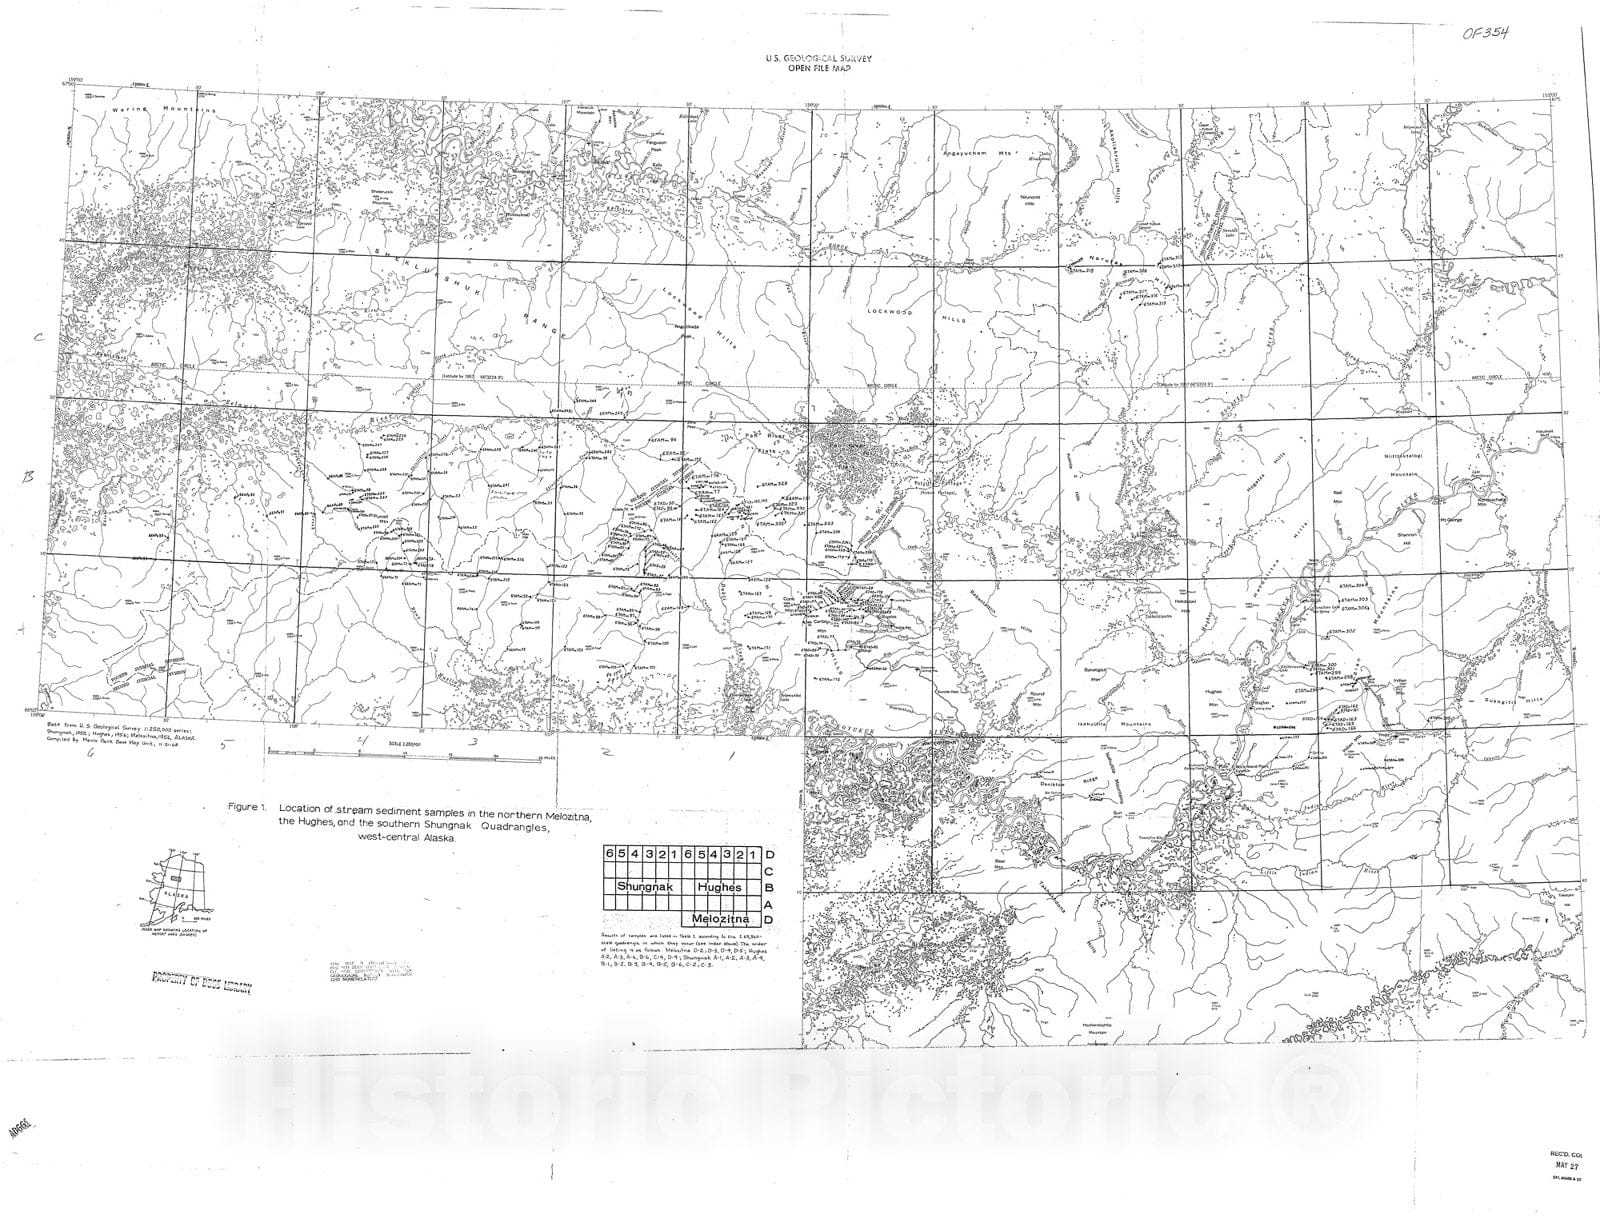 Map : Results of stream-sediment sampling in the northern Melozitna, the Huges, and the southern Shungnak quadrangles, west-central Alaska, 1969 Cartography Wall Art :